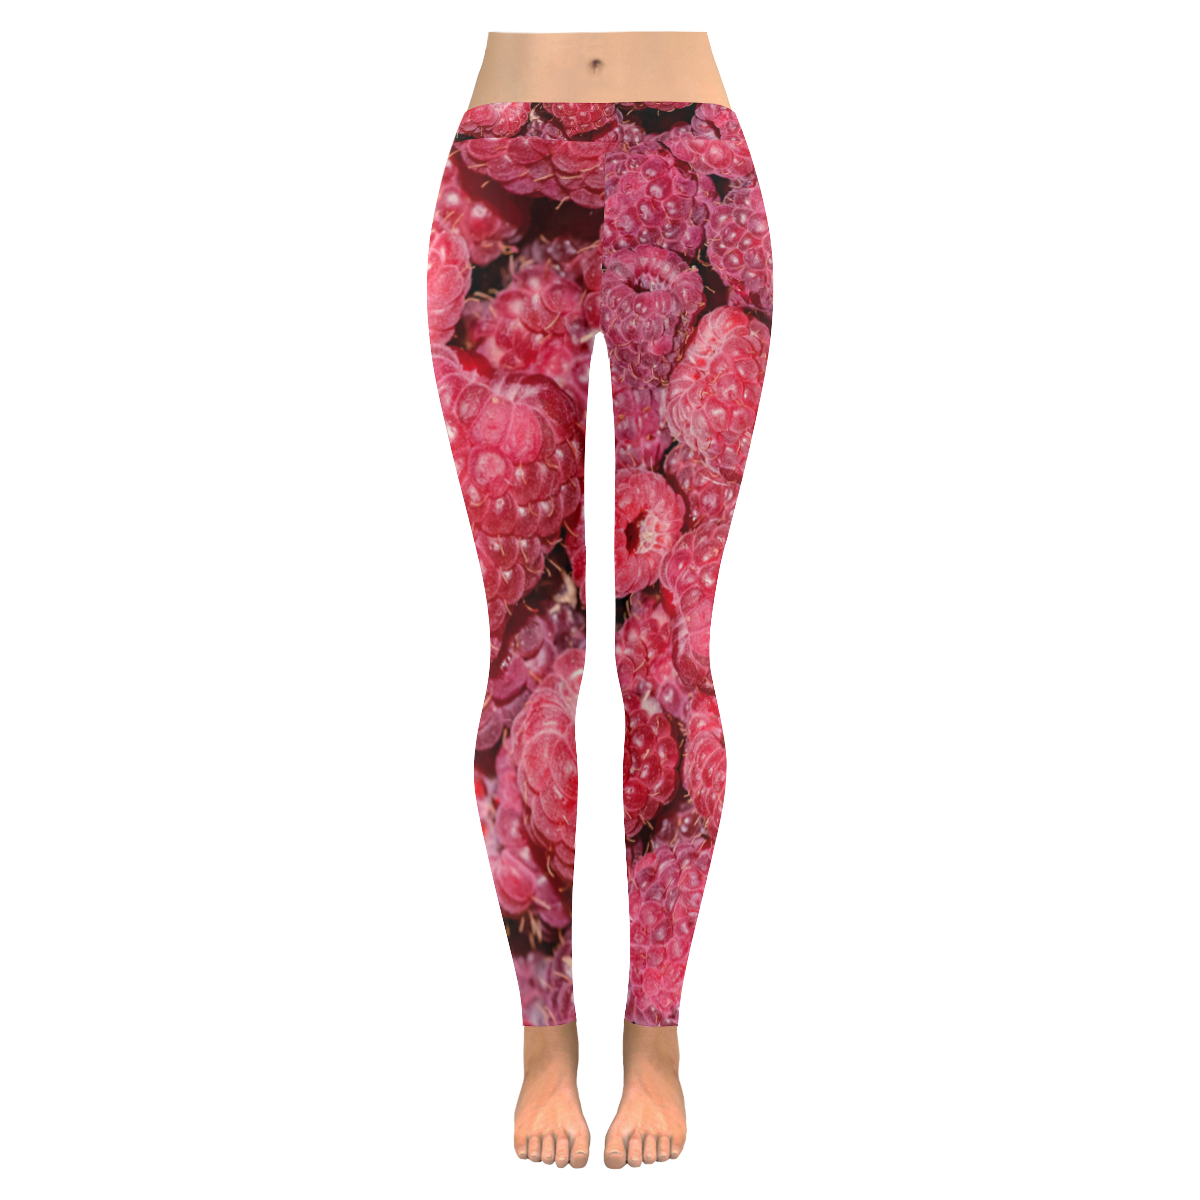 Red Fresh Raspberry Yummy Summer Berries Women's Low Rise Leggings (Invisible Stitch) (Model L05)